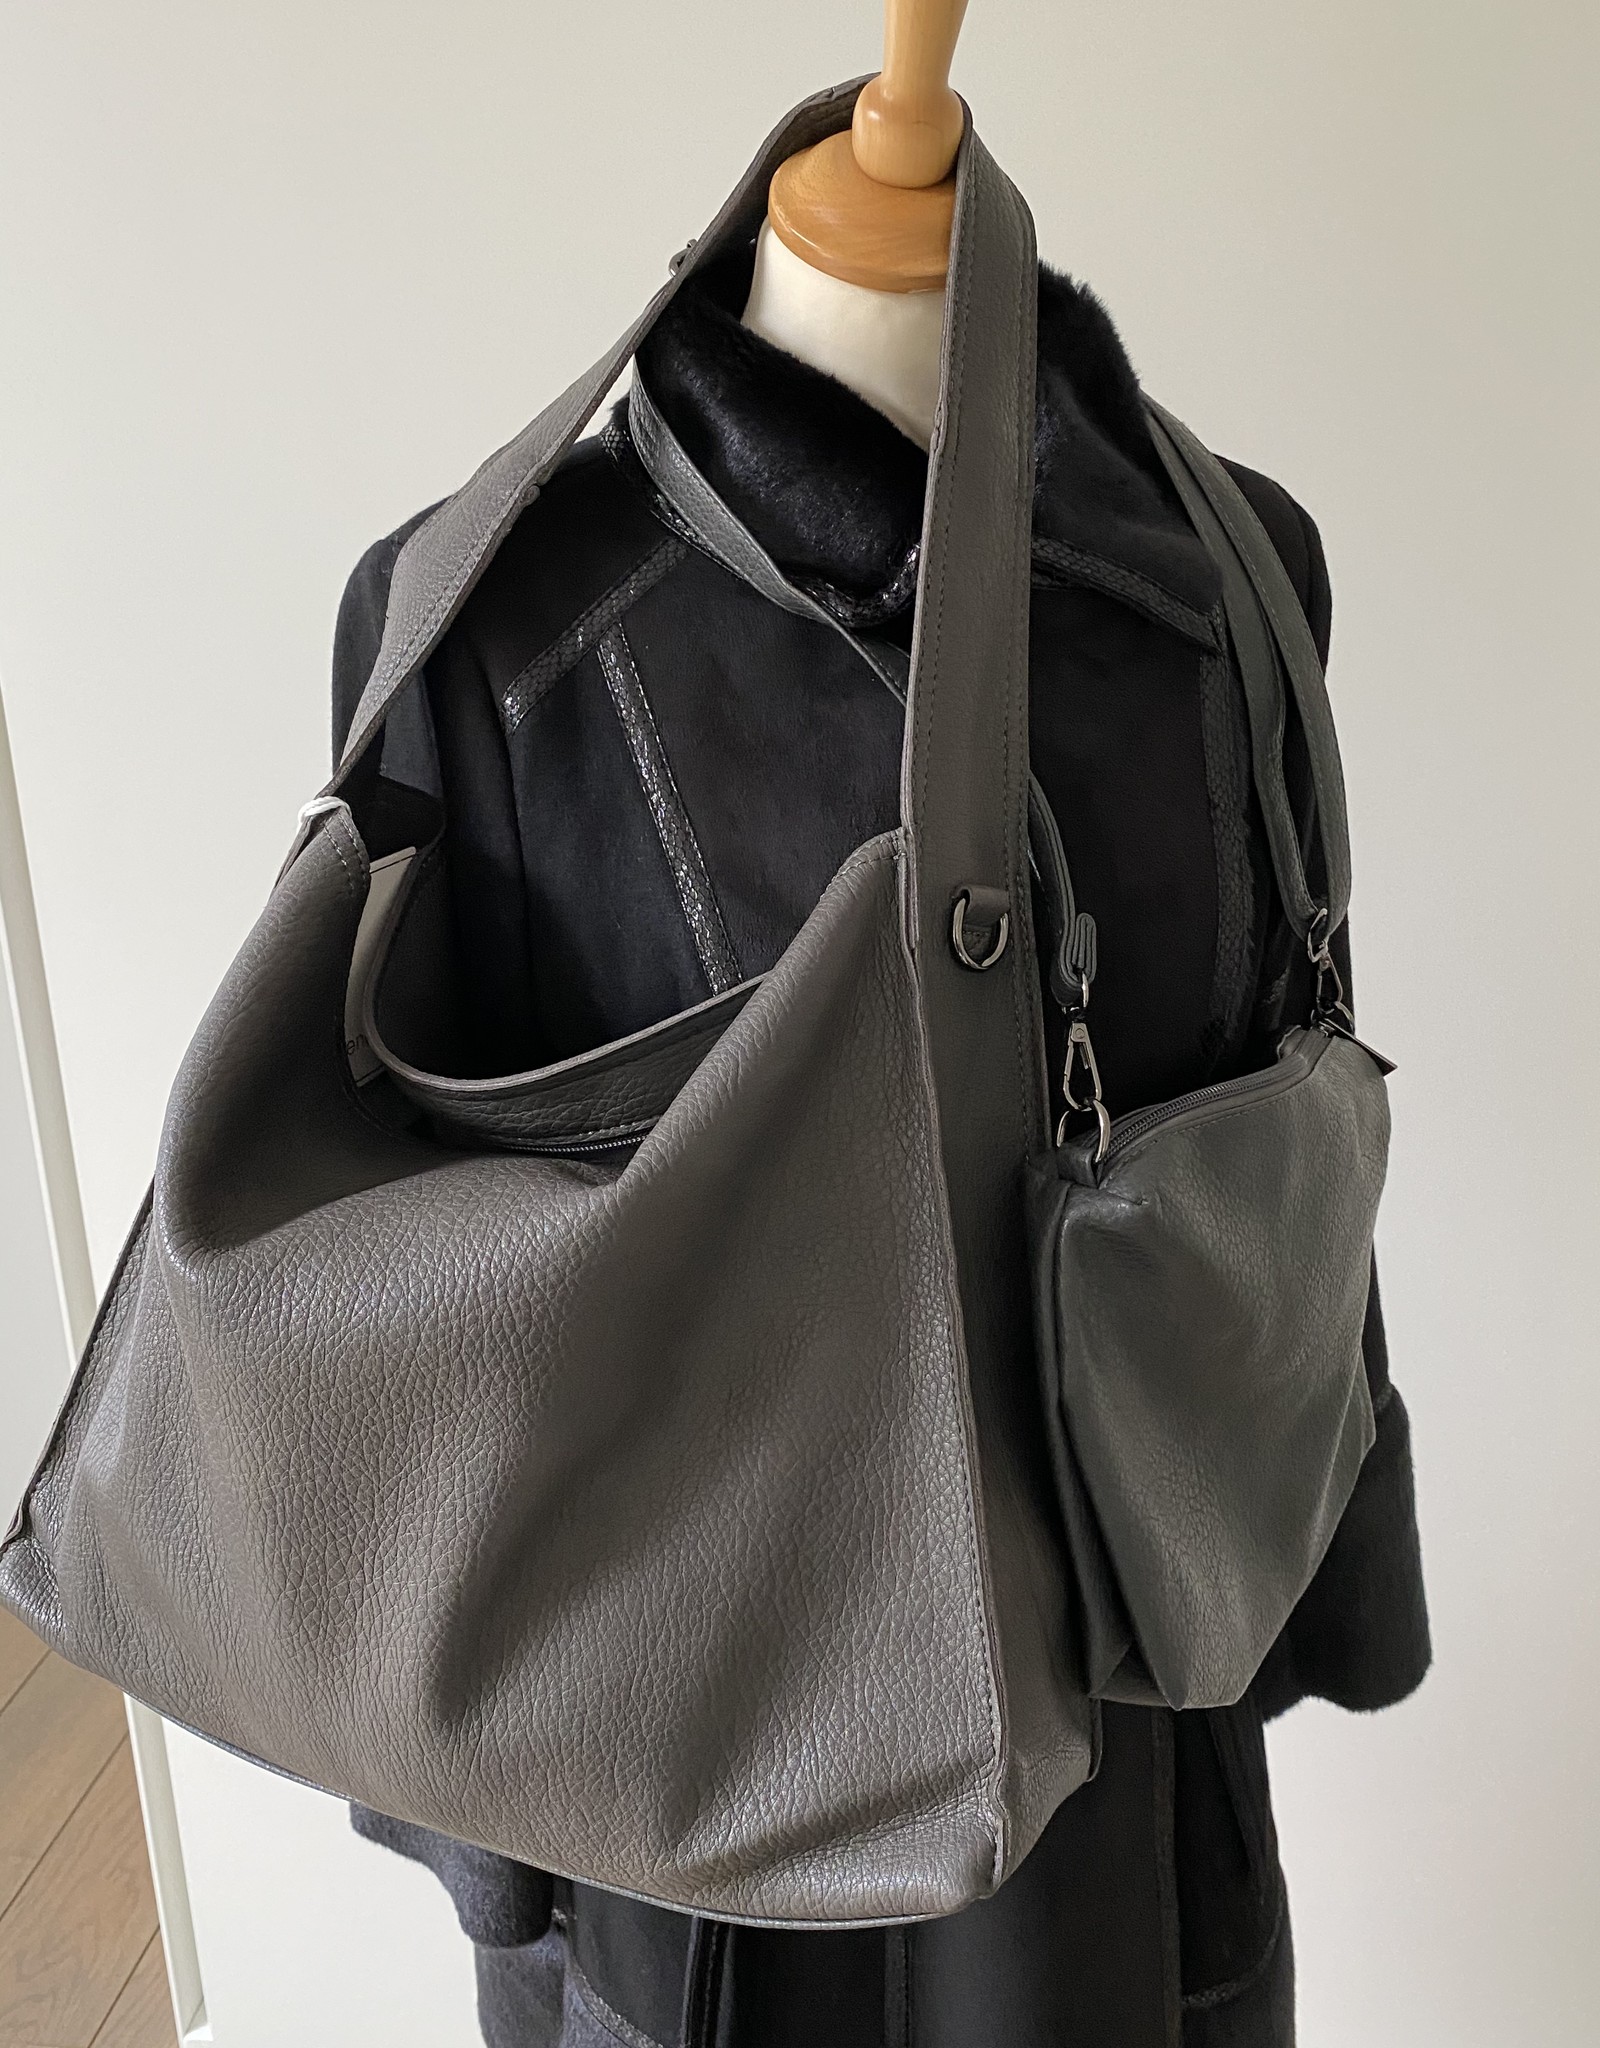 Big bag, artificial leather with little bag inside